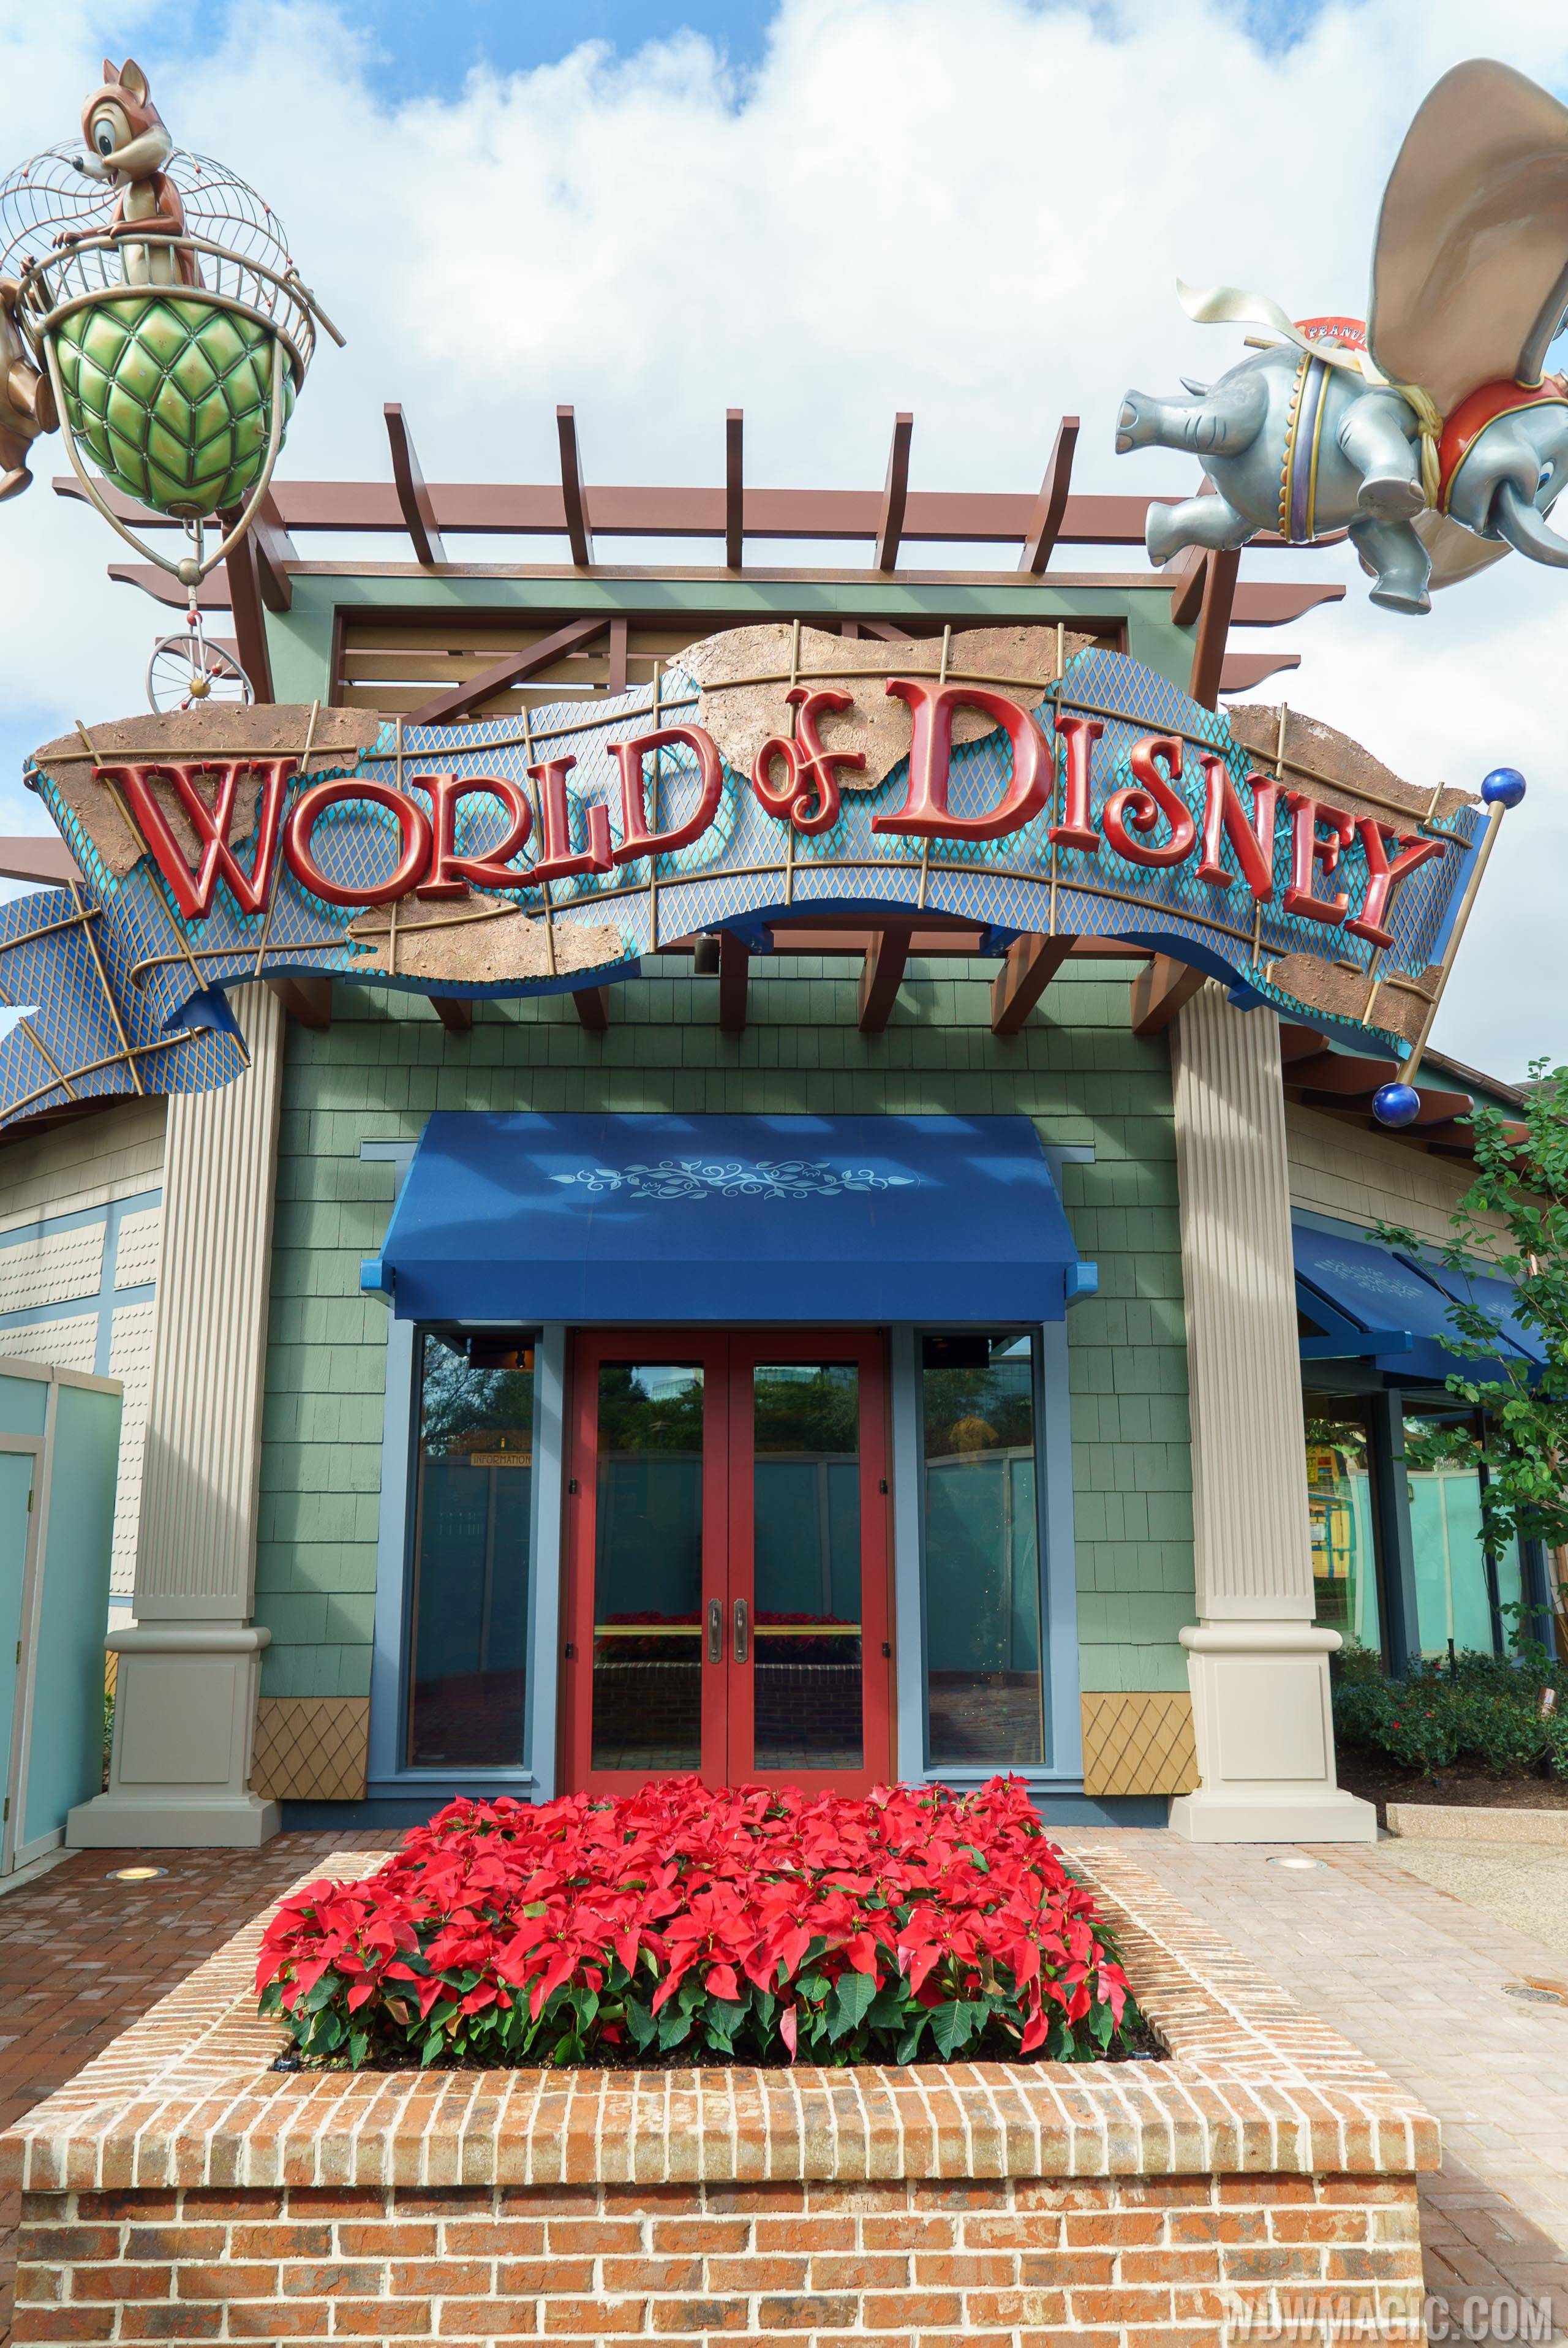 World of Disney expansion - New exterior entry